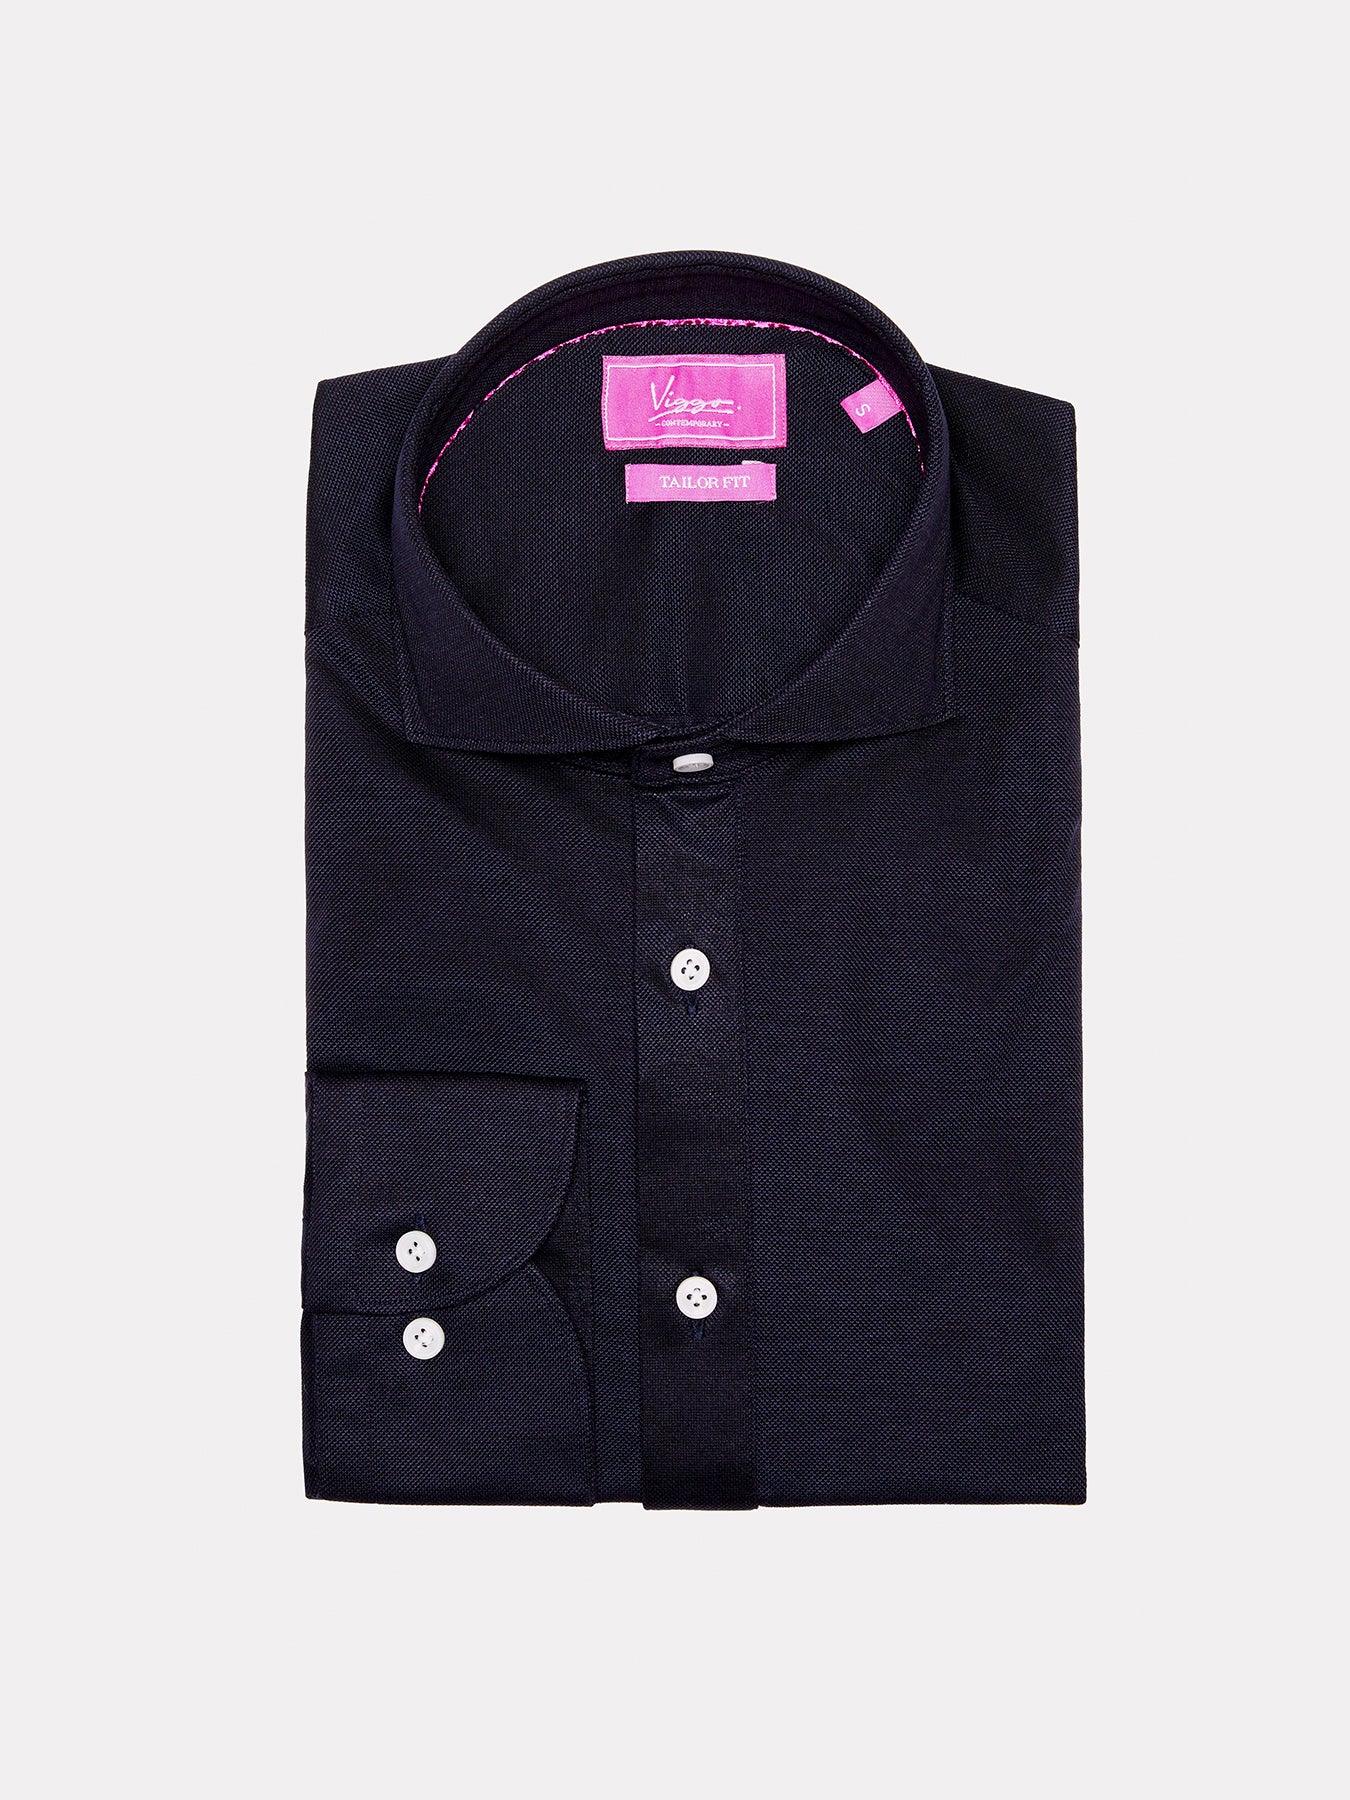 Black popover shirt with navy blue texture